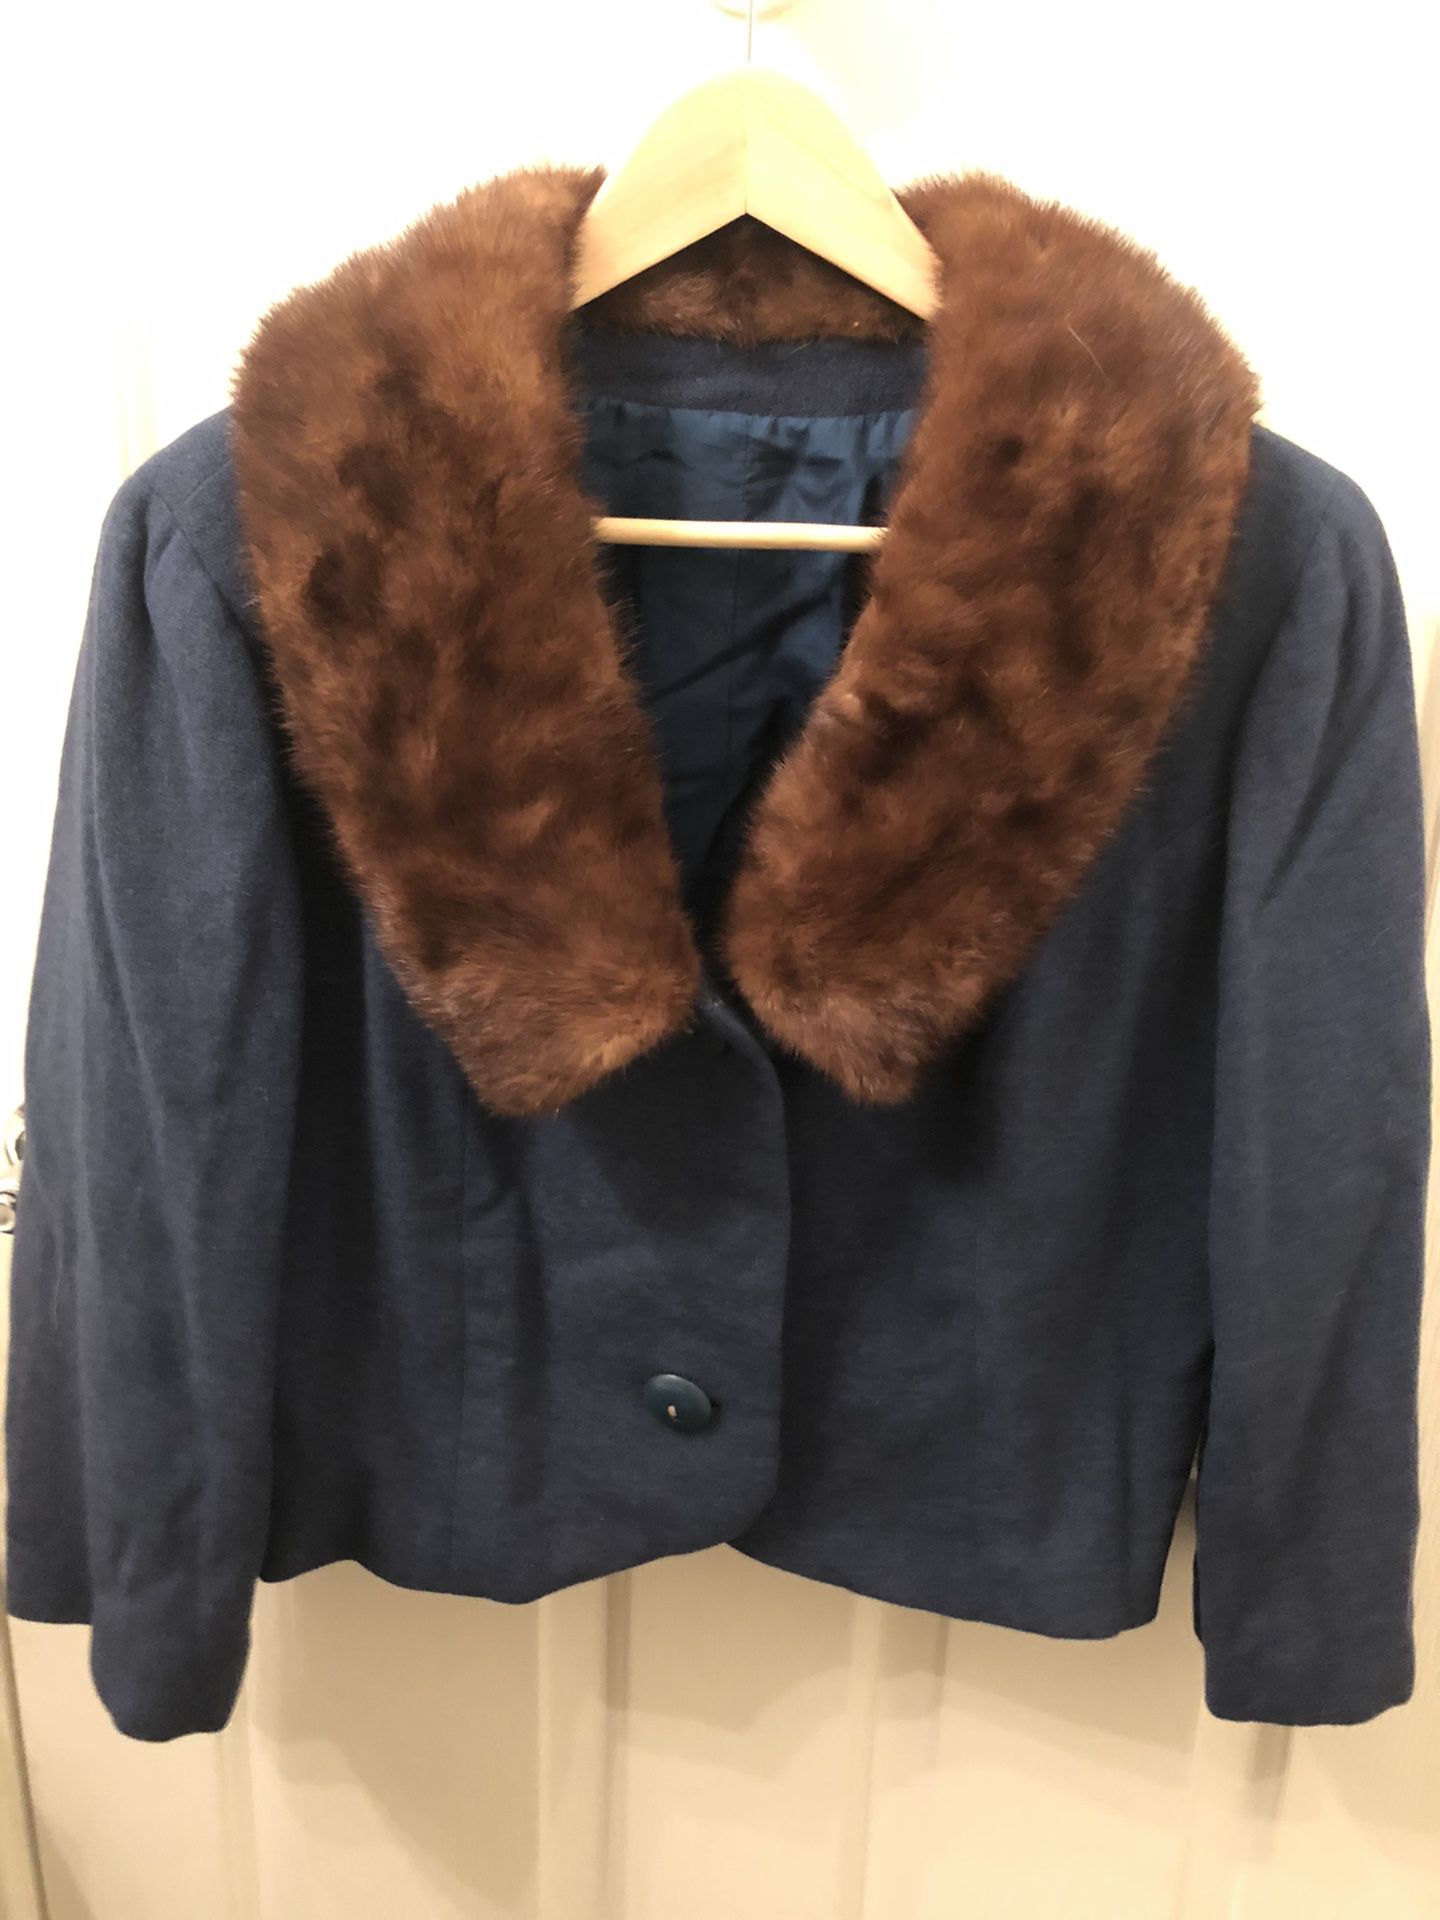 Super Cute Cropped Vintage 50s 60s Wool Coat With Fur Collar - Medium